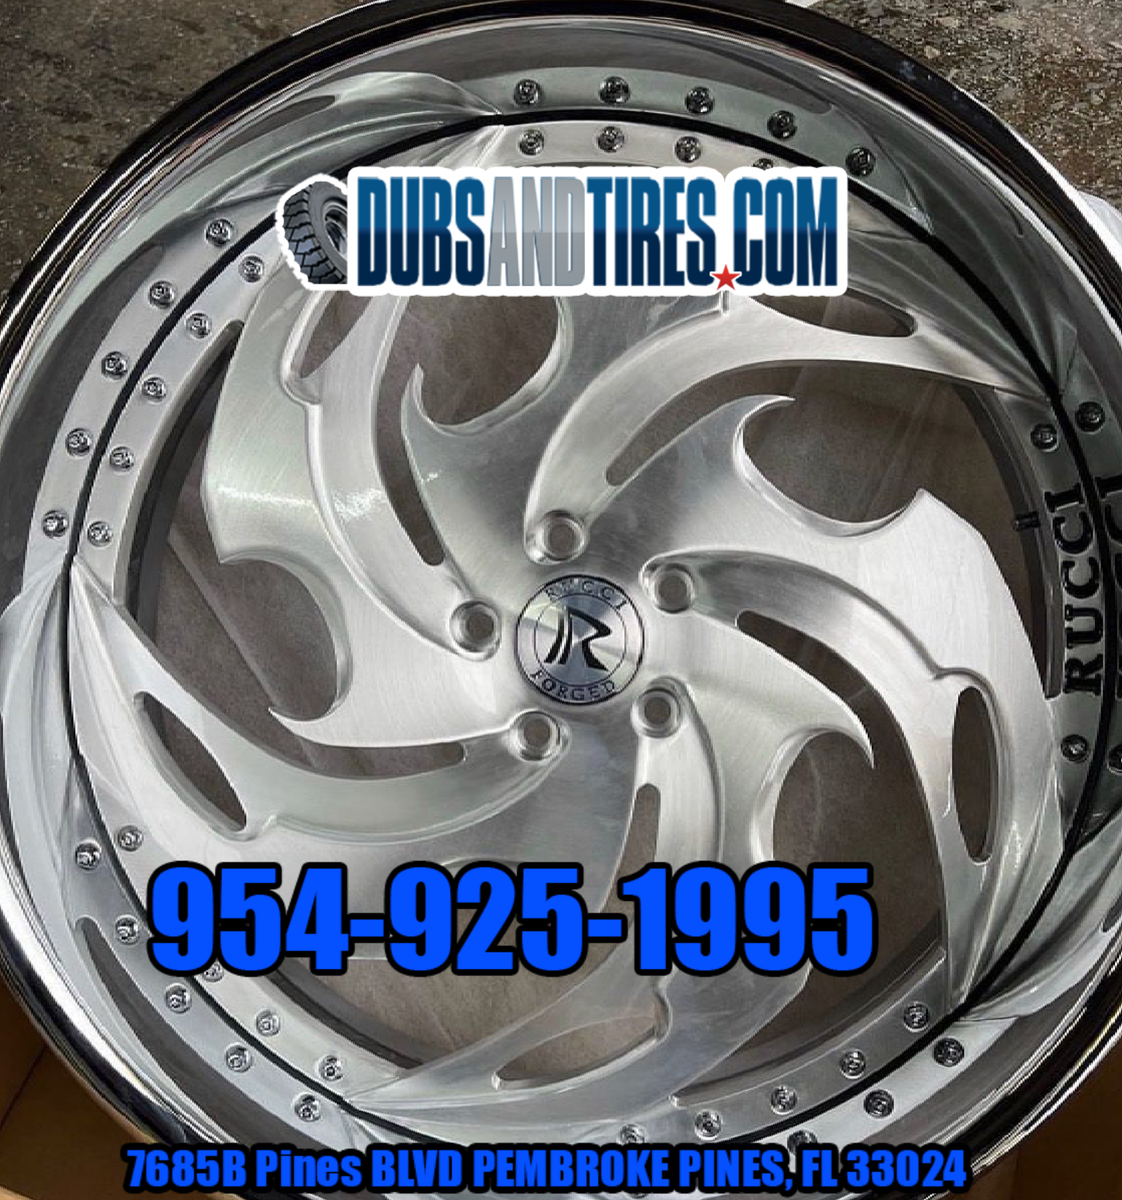 22 Rucci One Way Wheels Chrome RIMS Staggered 22x9.5(Front) 22x10